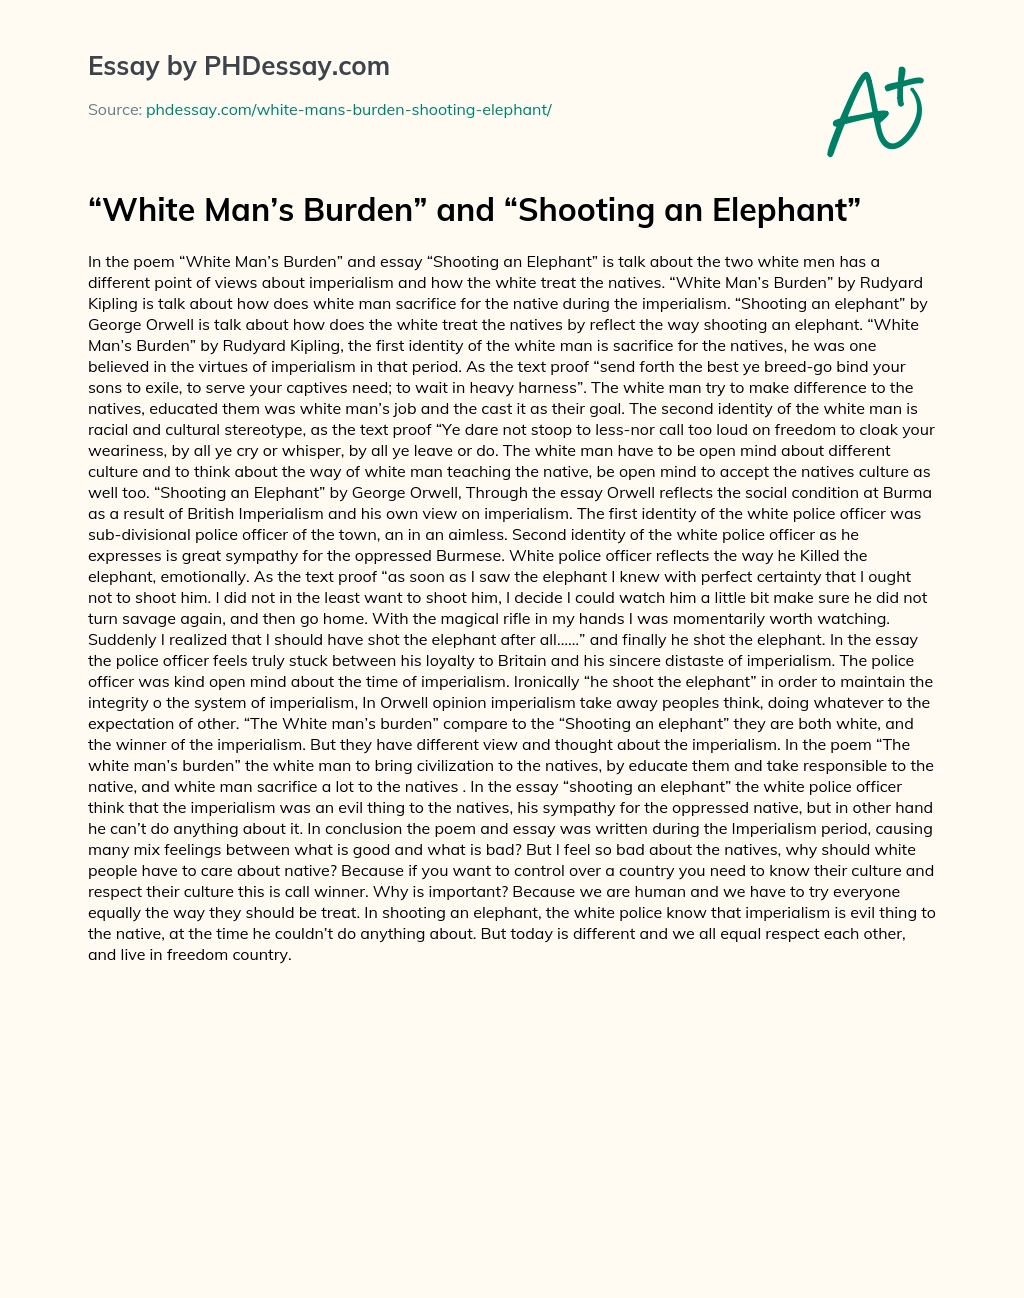 White Mans Burden and Shooting an Elephant essay